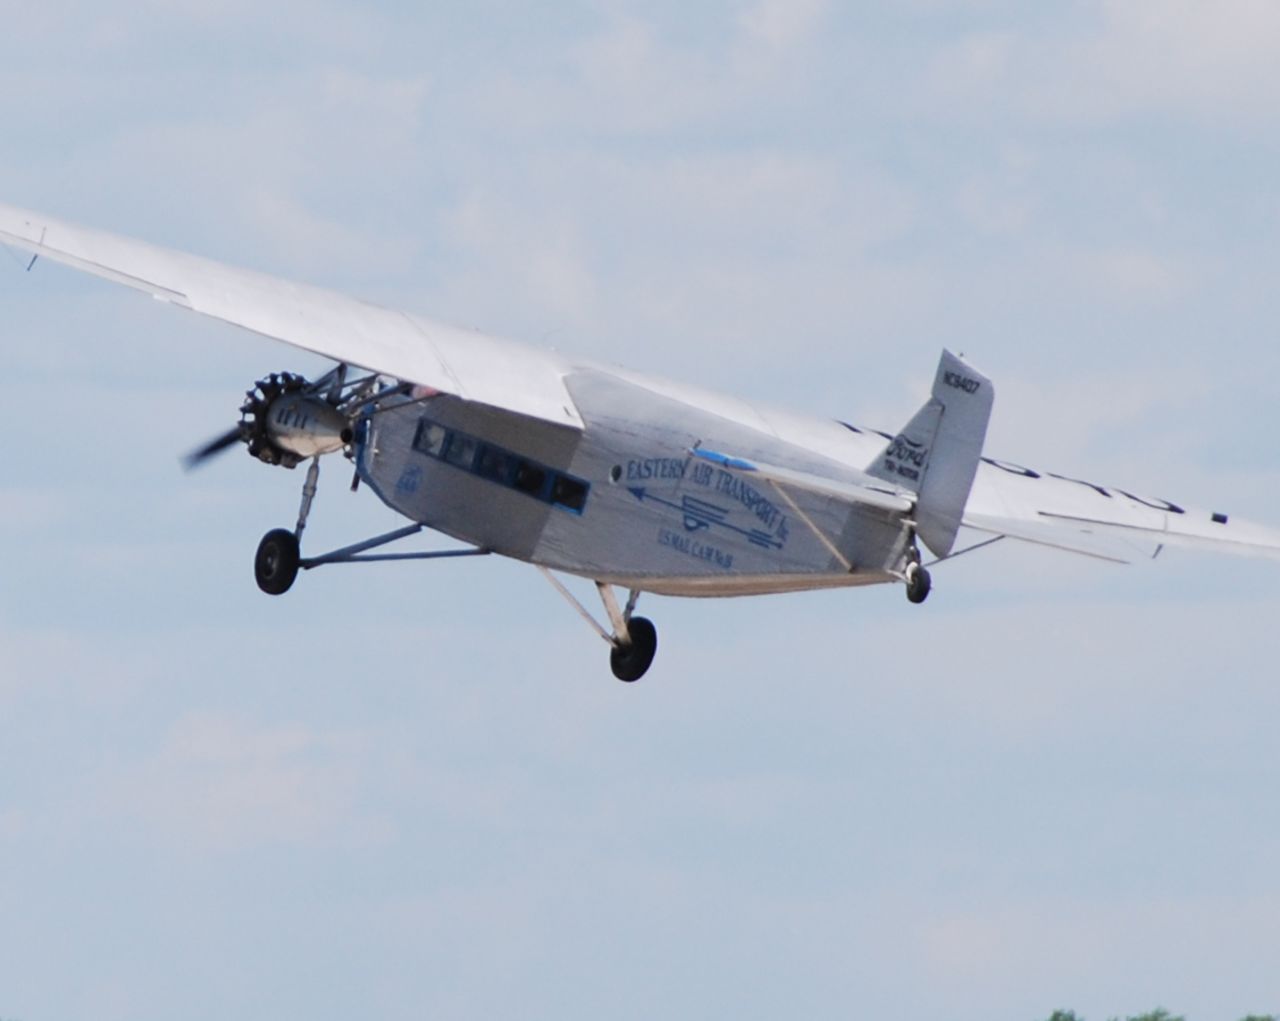 The Ford Tri-Motor was slower and louder than the Boeing 247.